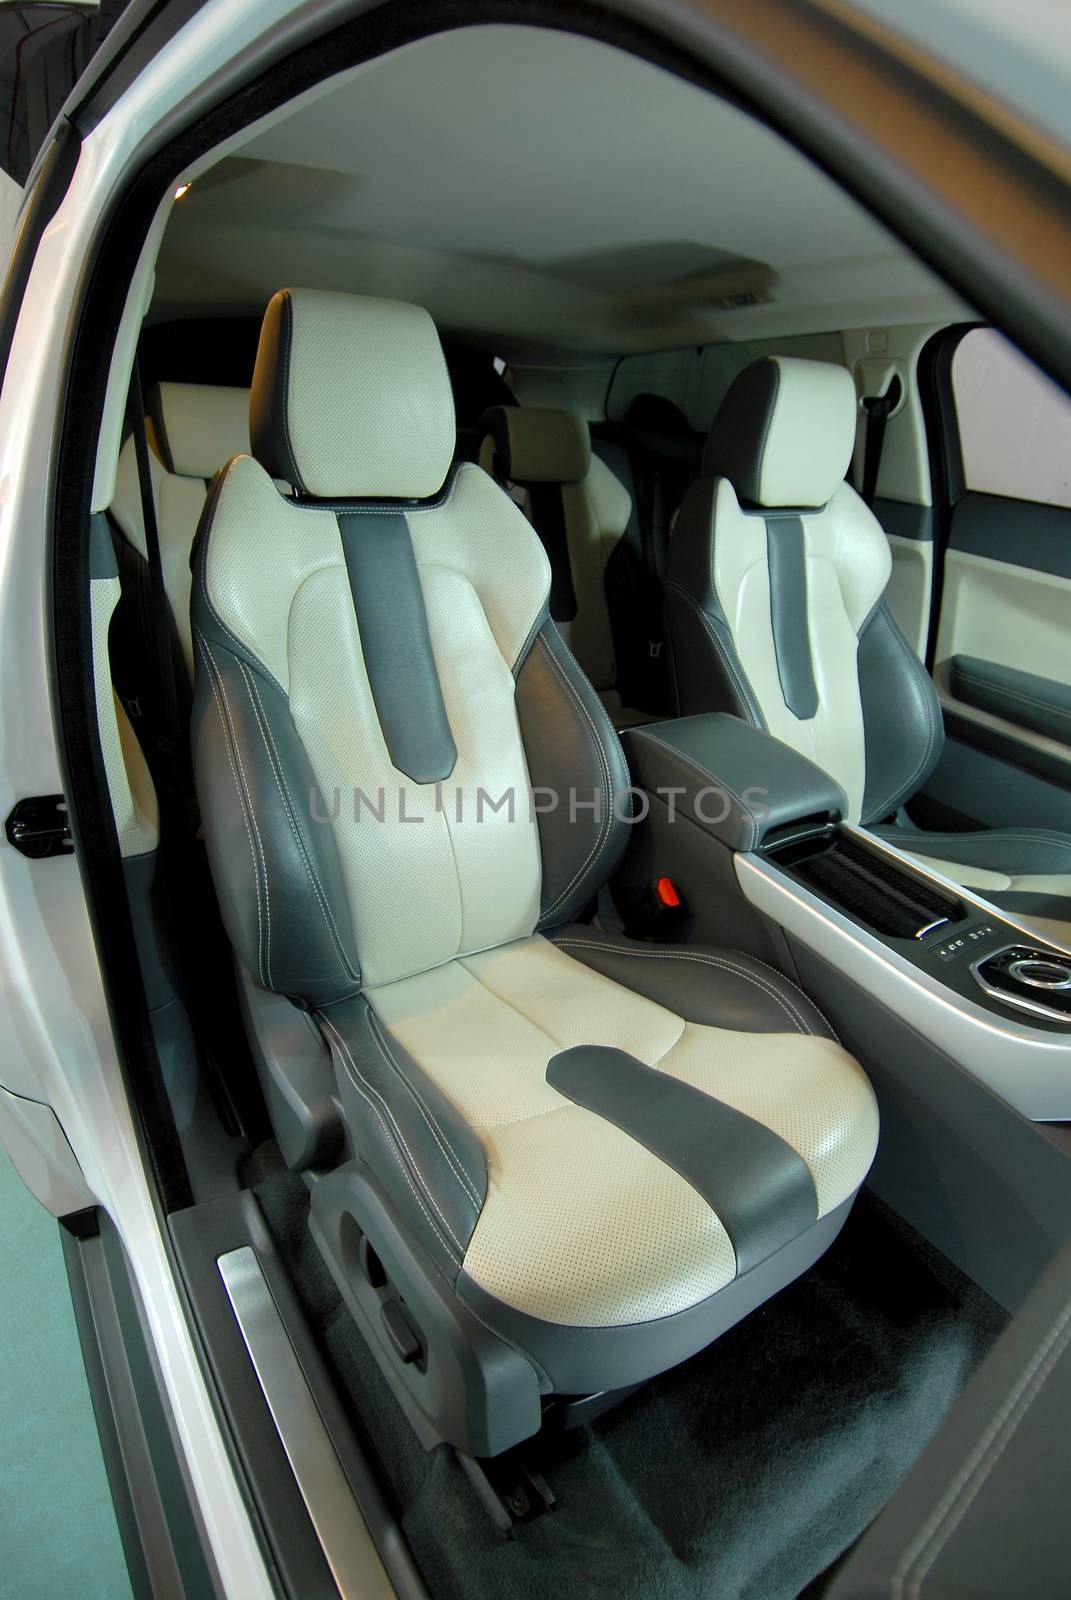 Leather seats in the big luxury SUV by aselsa